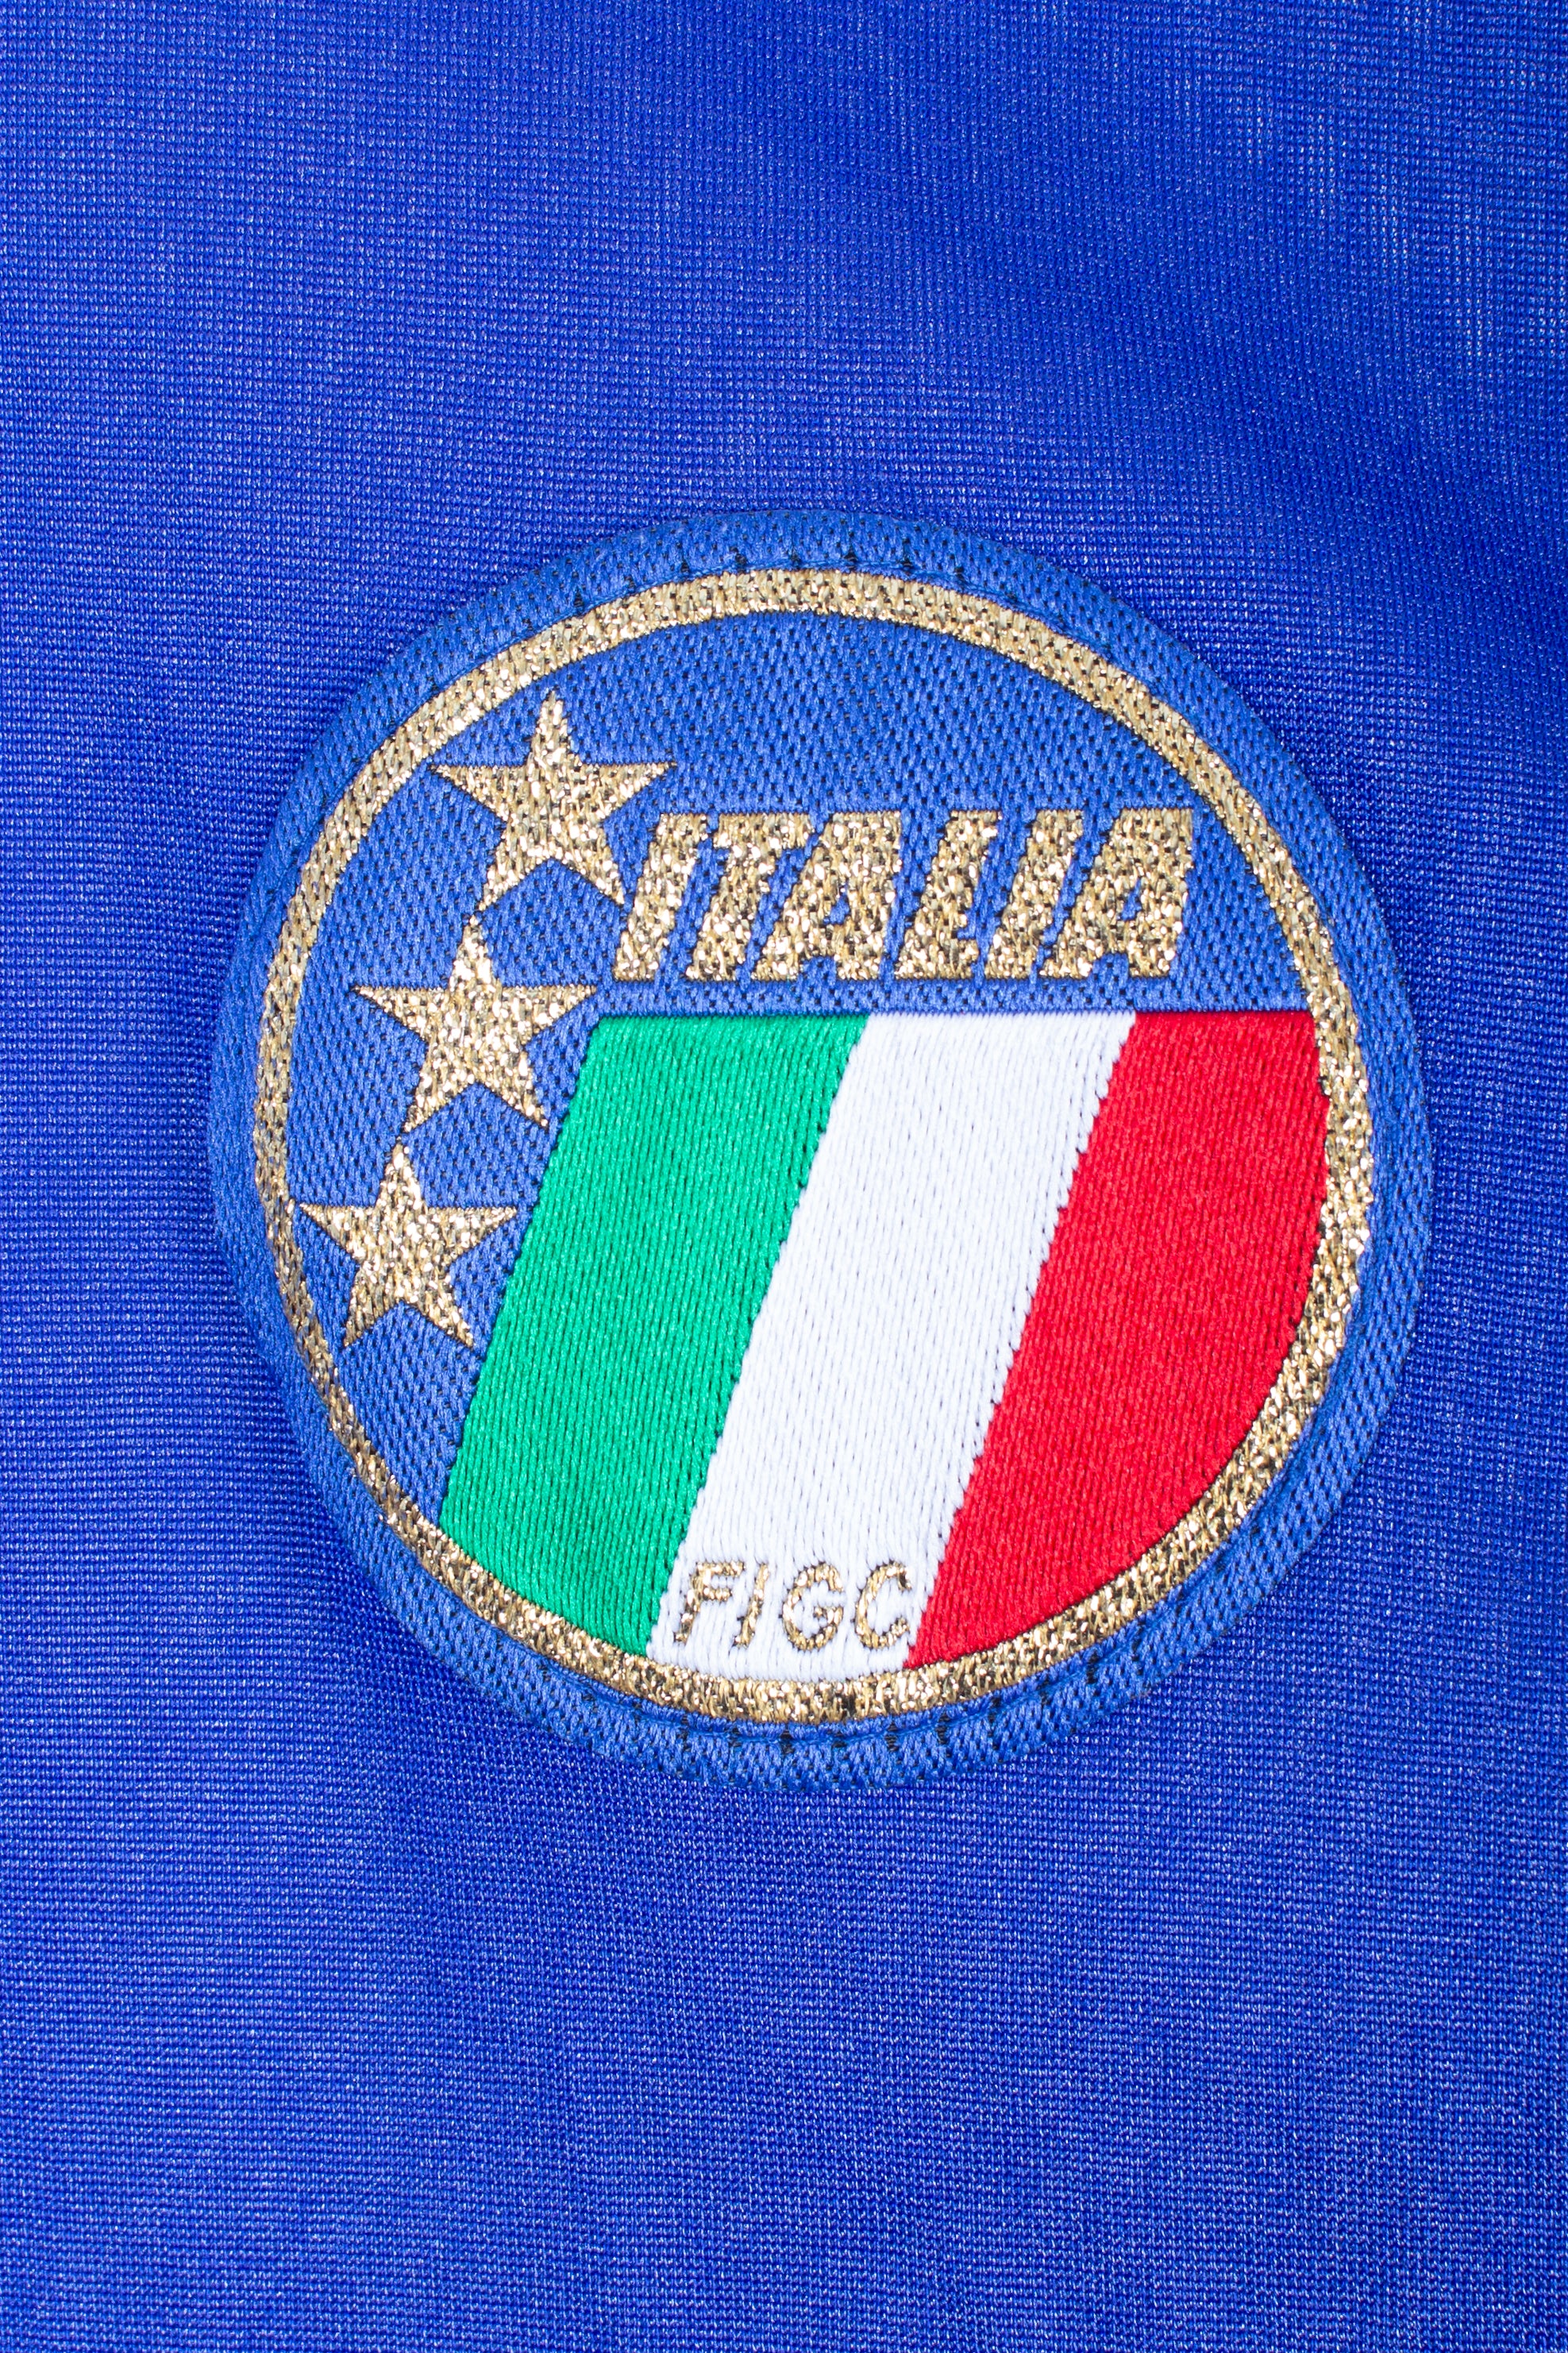 Italy 1986/90 Home Shirt (S/M)